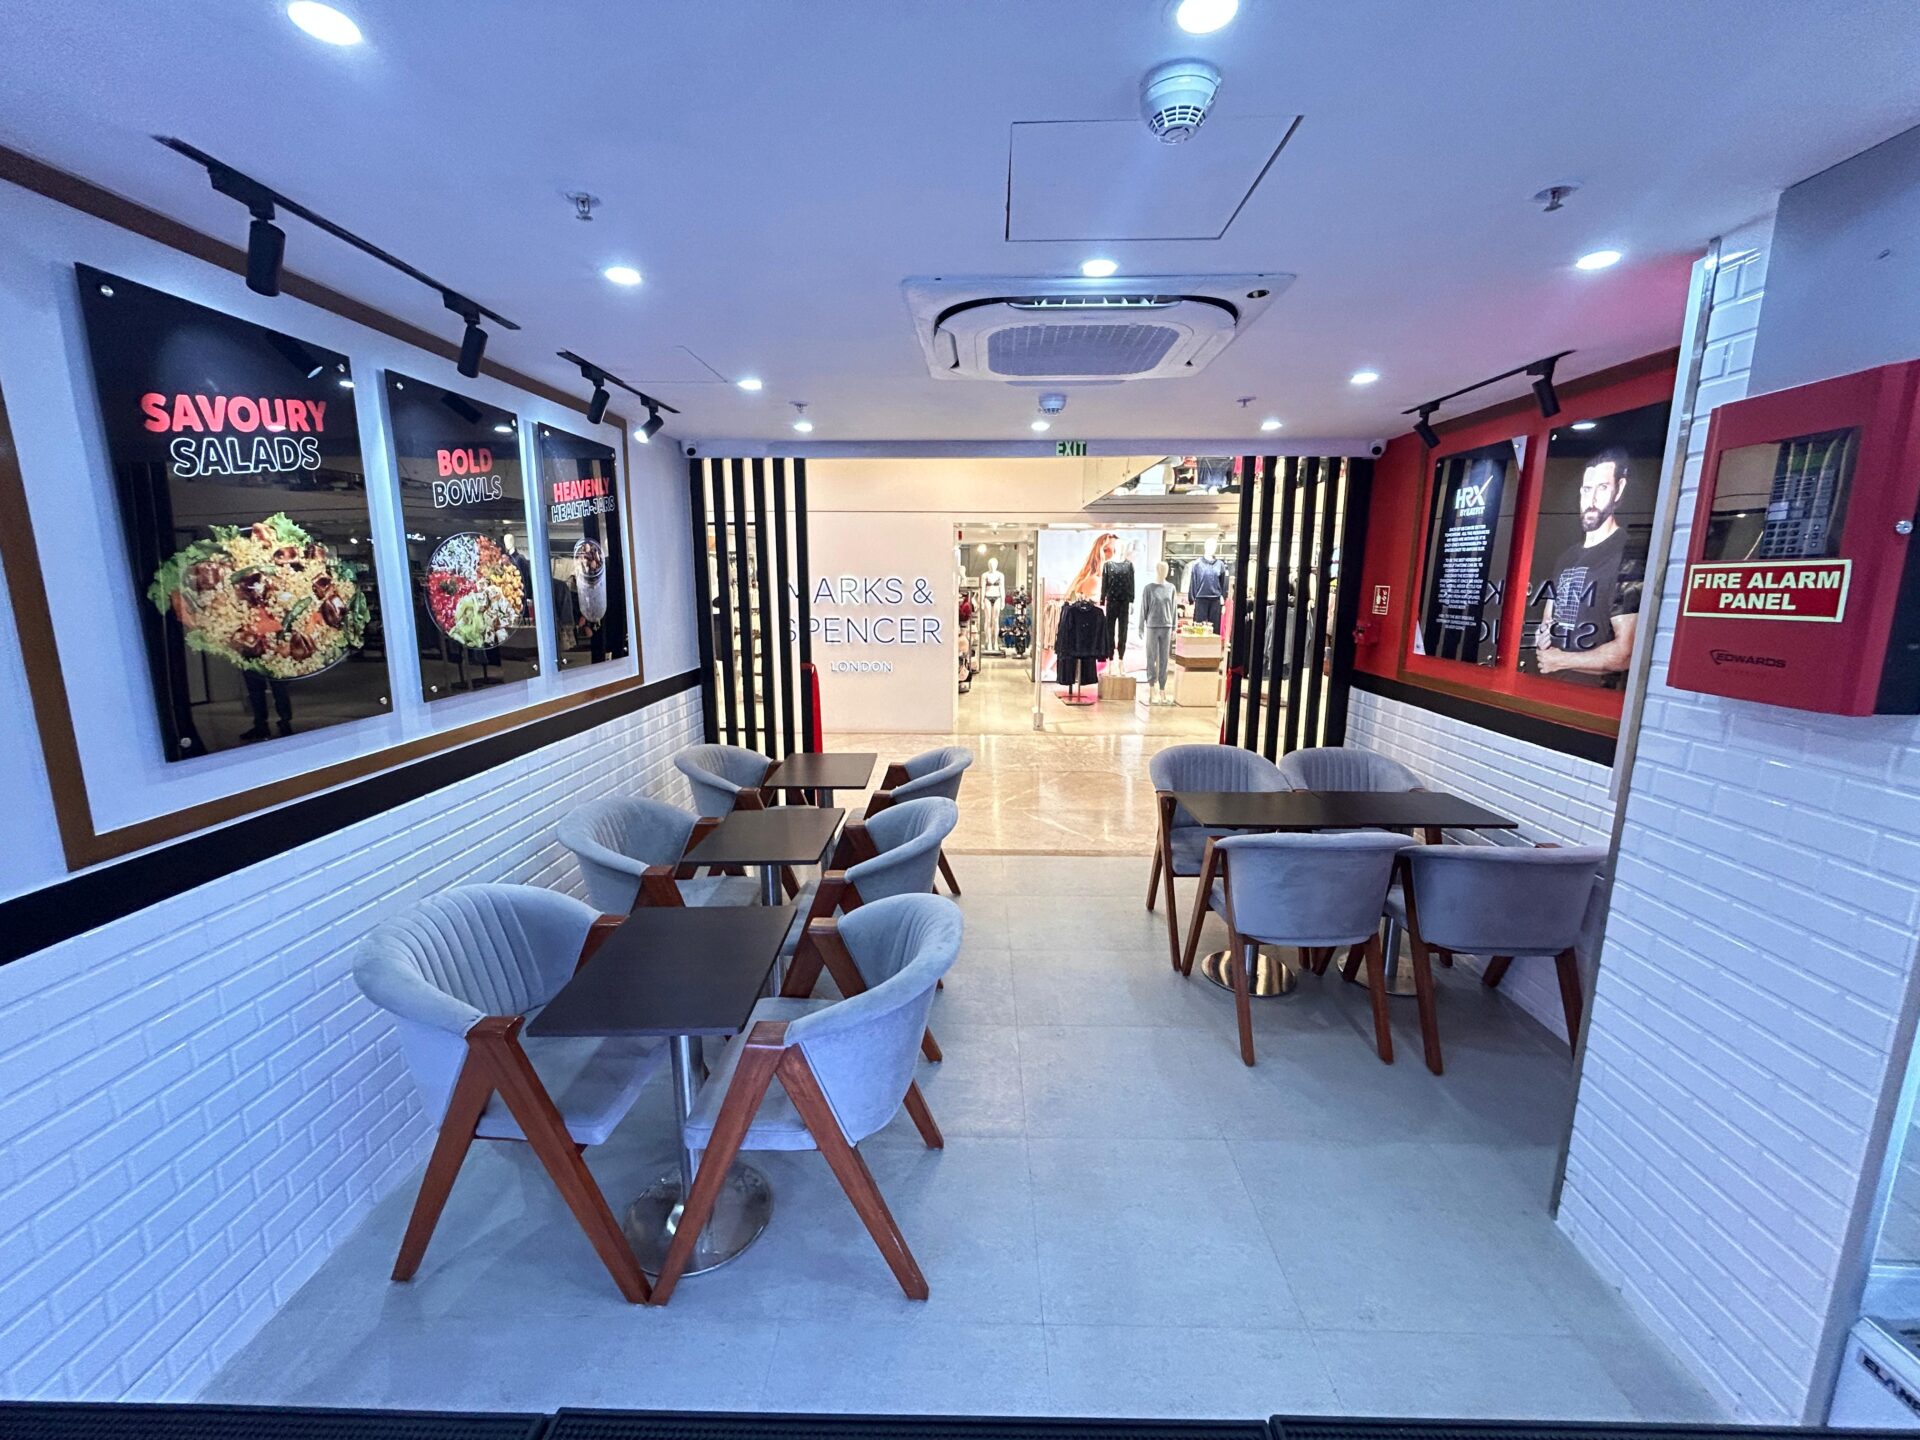 HRX in collaboration with Exceed Entertainment launches its first ever HRX Café in Mumbai